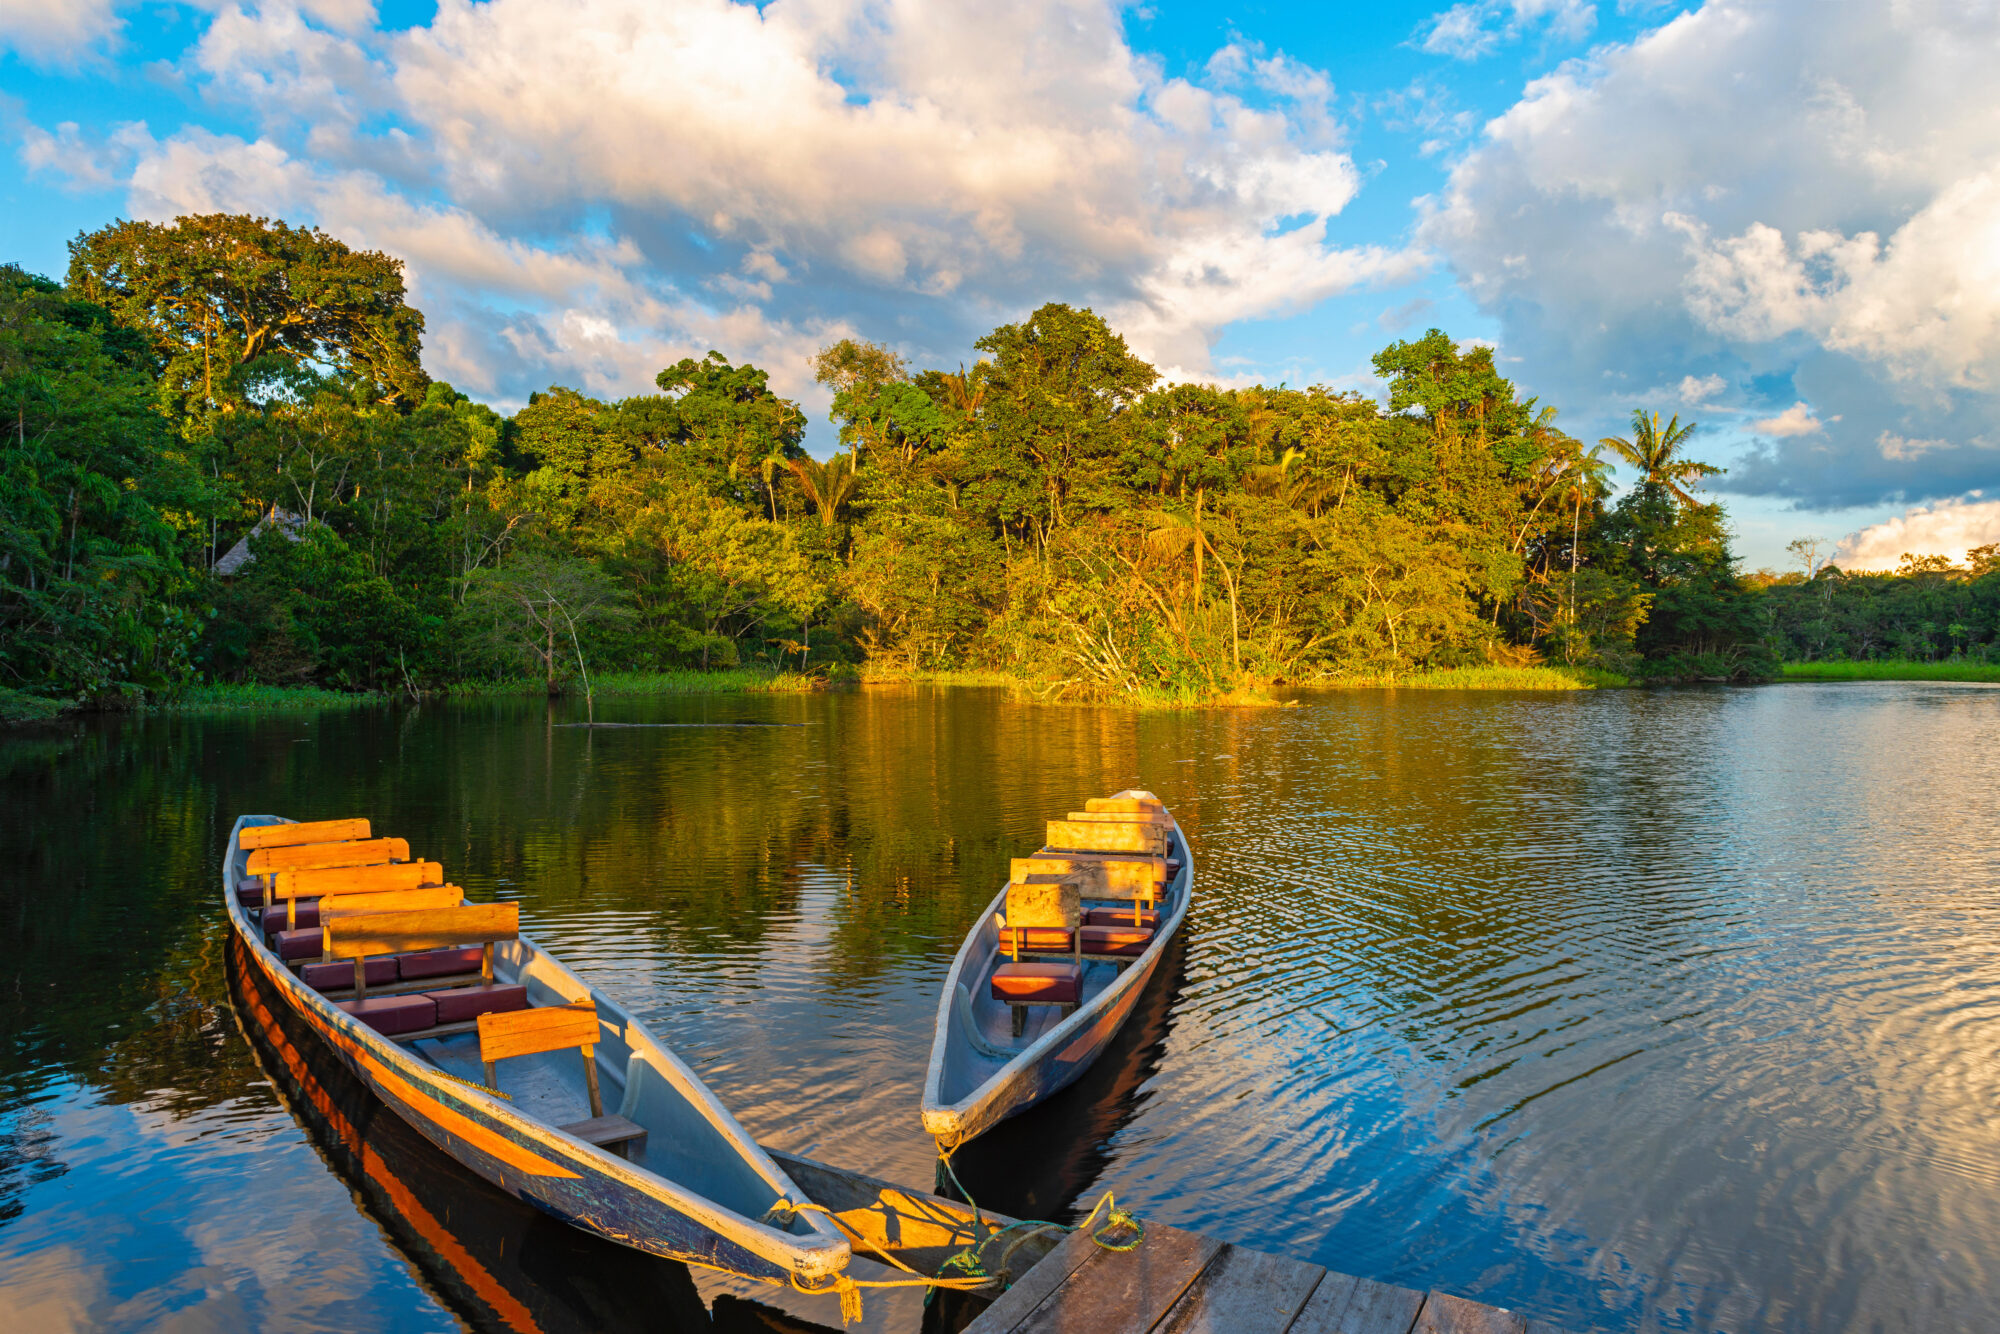 <p>Two traditional wooden canoes at sunset in the Amazon River Basin with the tropical rainforest in the background, Yasuni National Park, Ecuador (image: Alamy)</p>